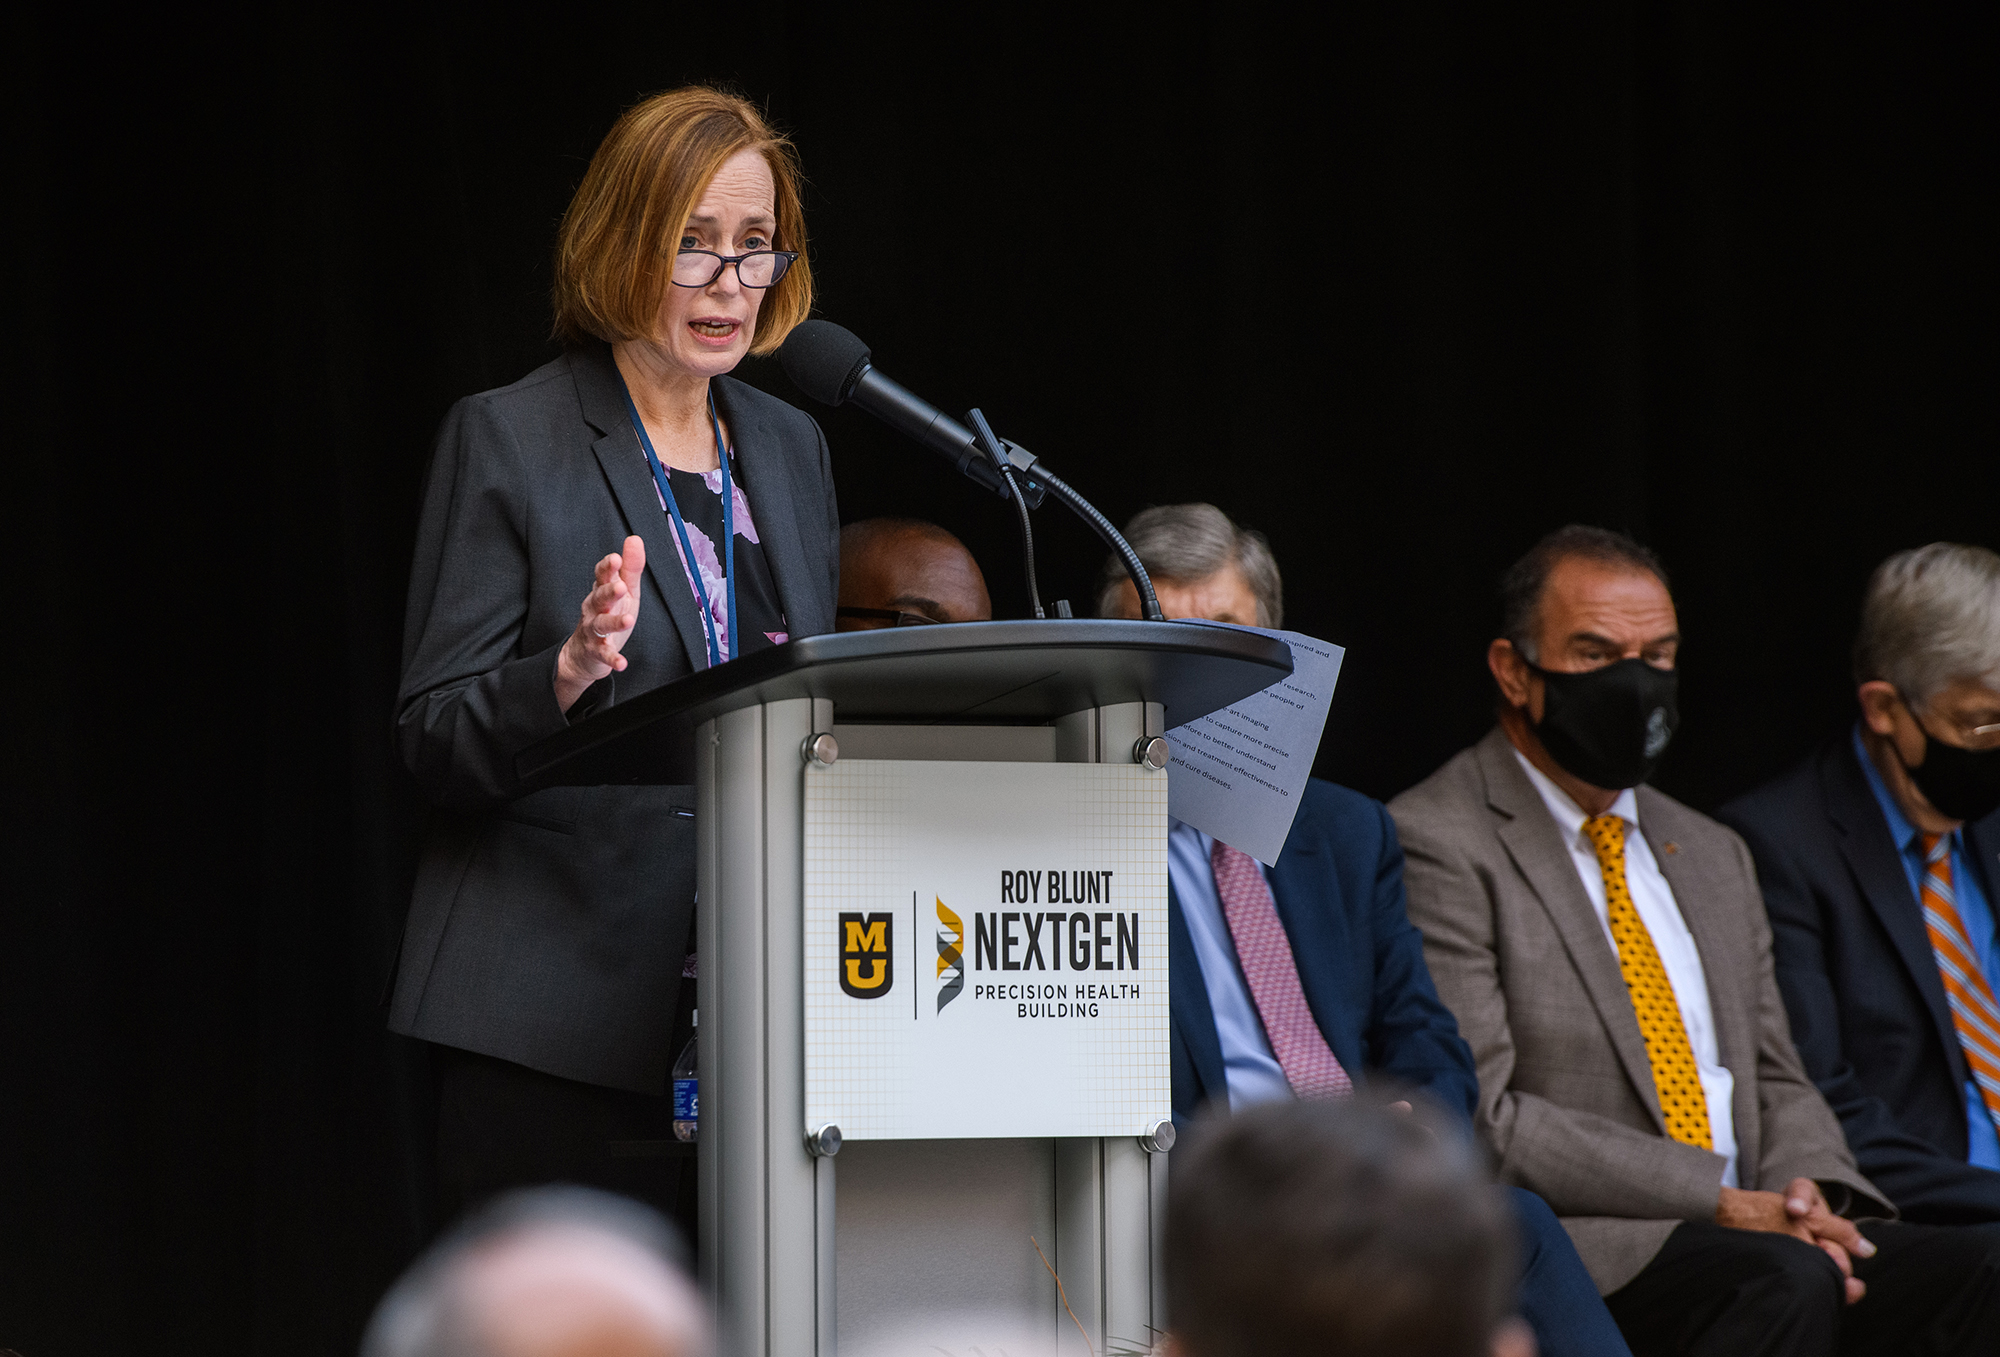 Talissa Altes, MD, Professor and Chair of Radiology, MU School of Medicine, during the Roy Blunt NextGen building Grand Opening Program on Tuesday, Oct. 19, 2021 in Columbia, Mo.